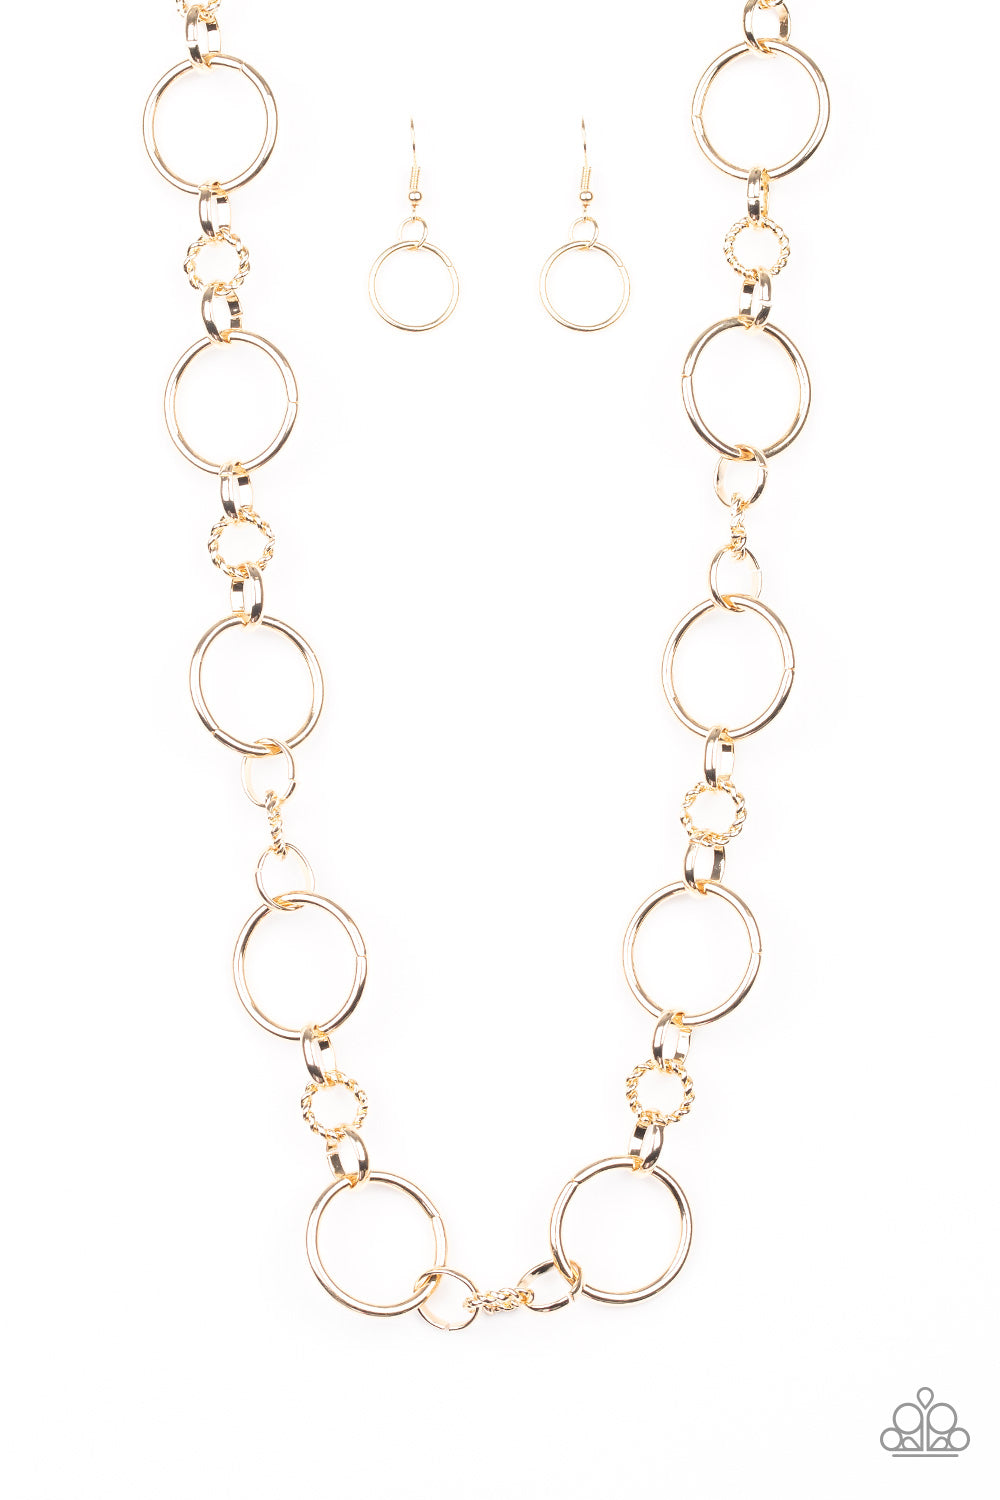 CLASSIC COMBO - GOLD NECKLACE